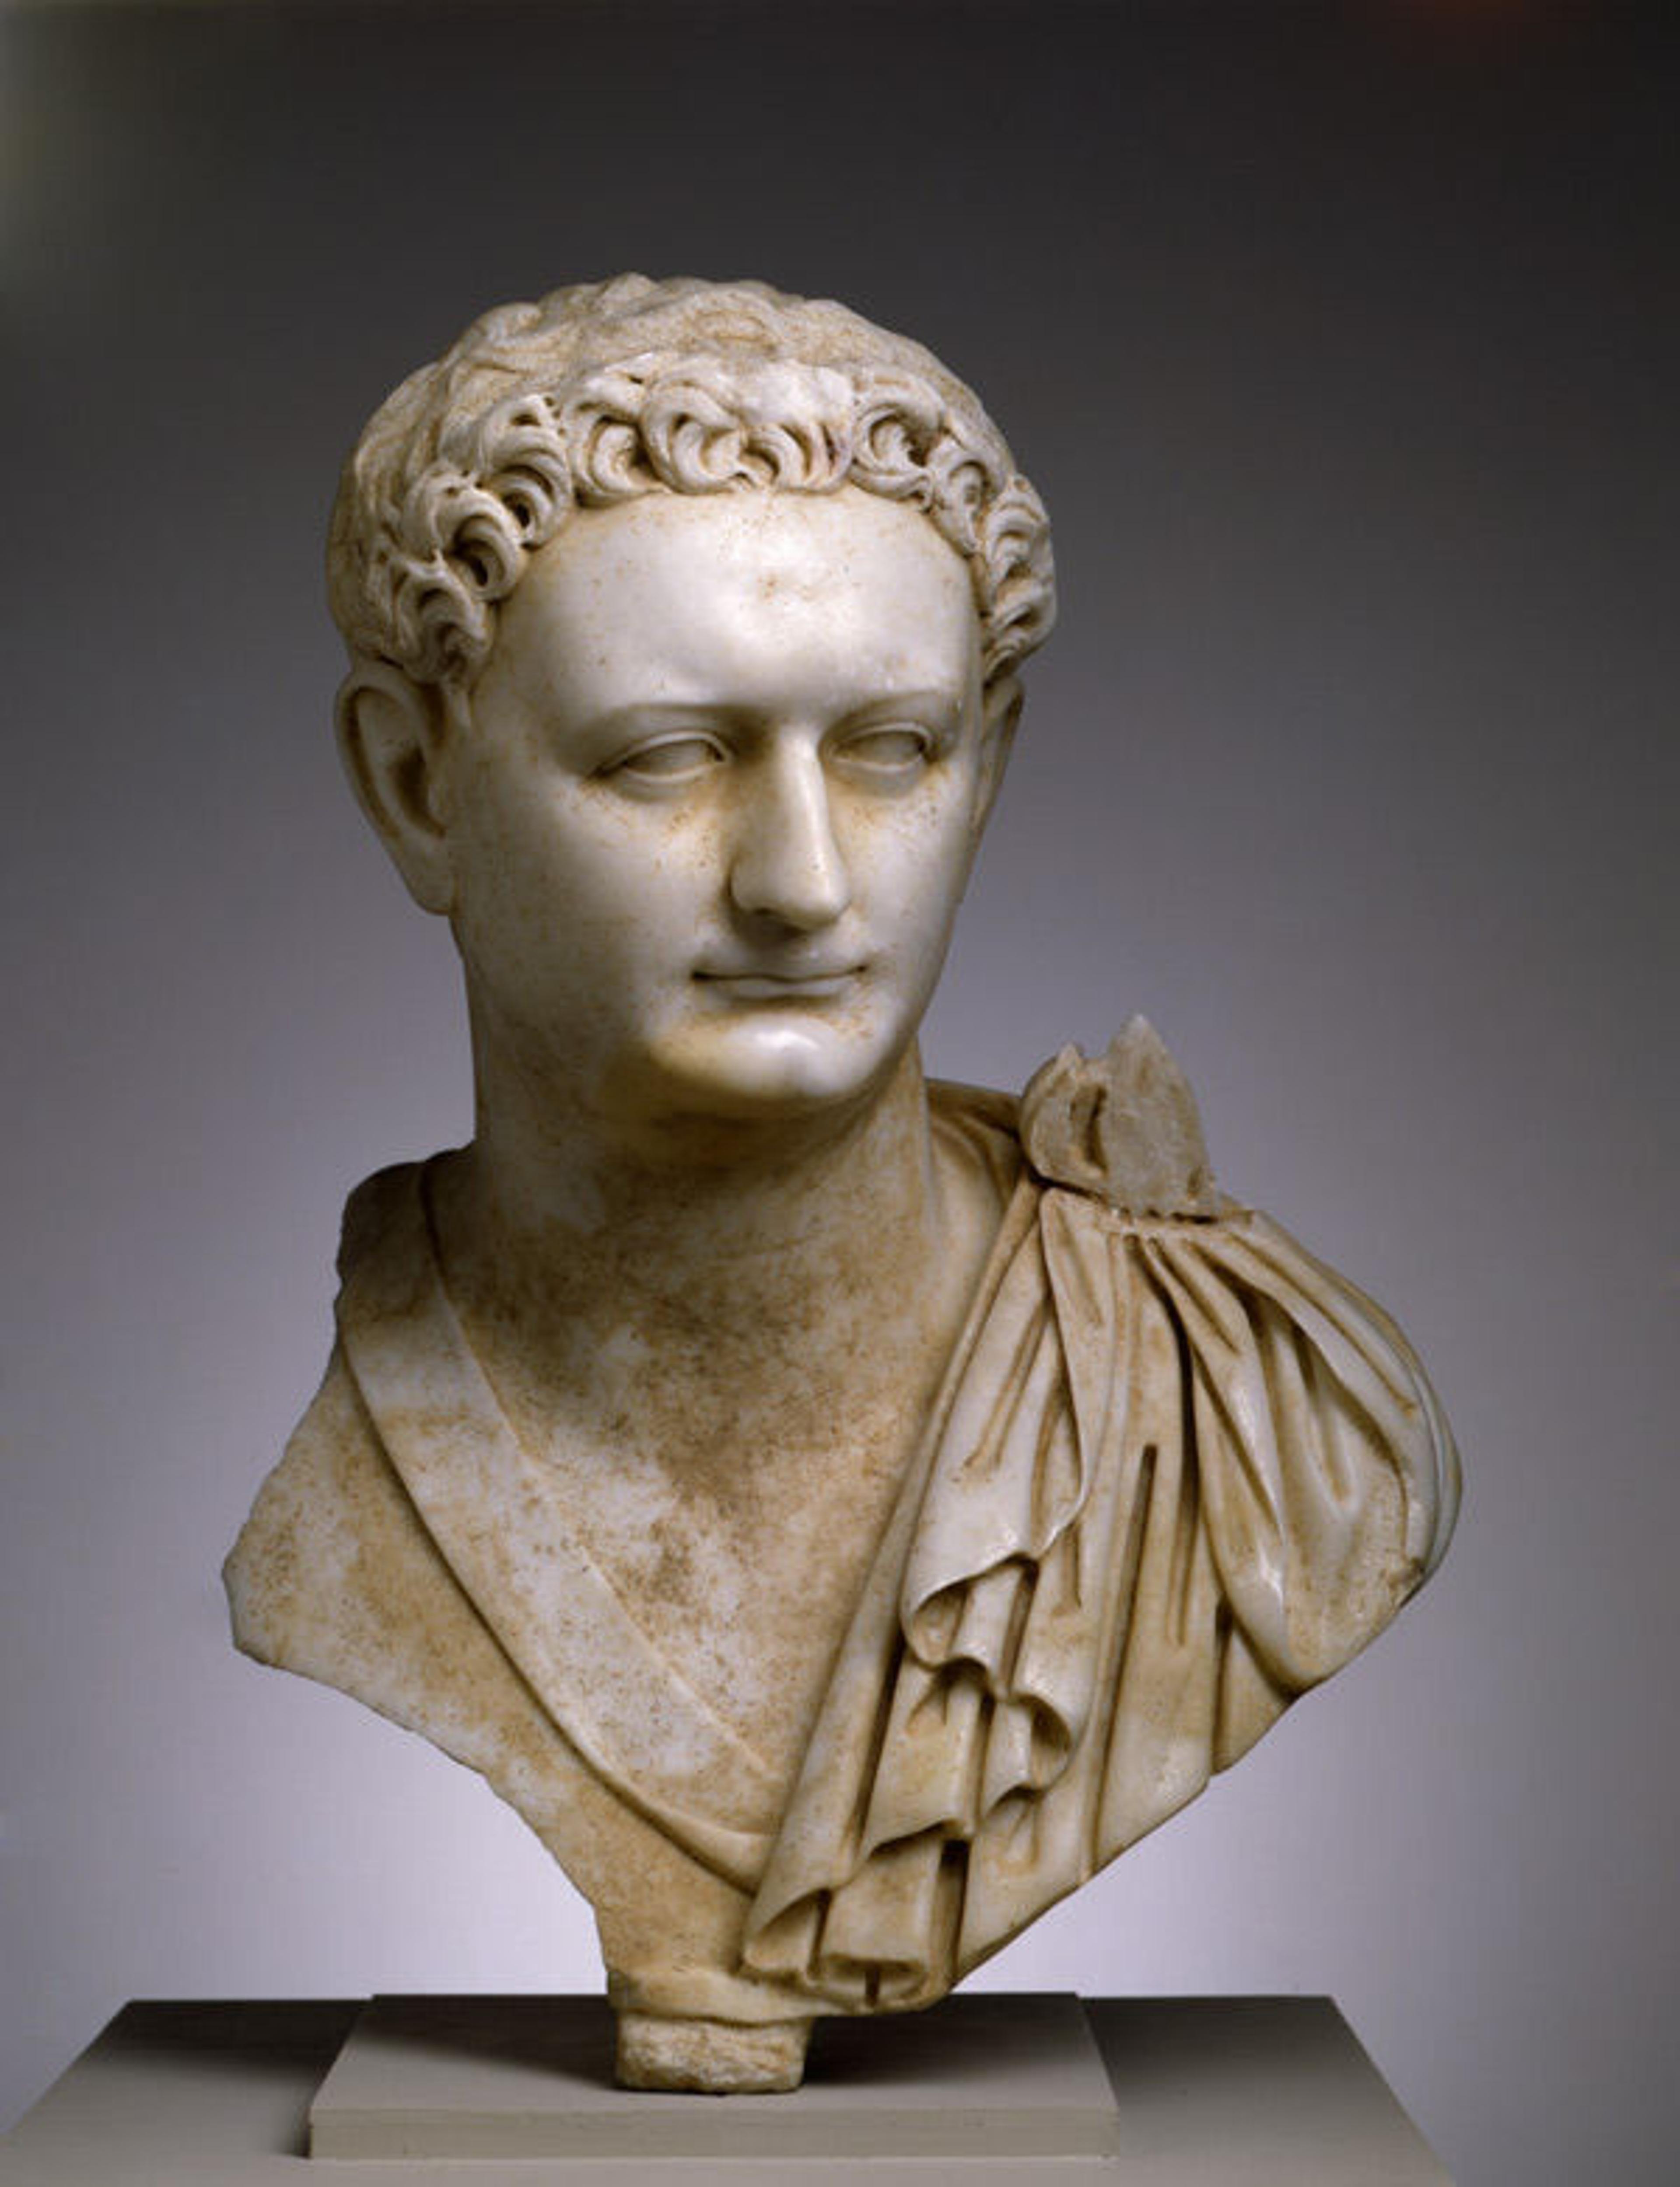 Portrait bust of Emperor Domitian, ca. 90 CE. Ancient Rome, from Italy. Parian marble; H: 23 7/16 in. (59.5 cm); W: 15 7/8 in. (40.3). The Toledo Museum of Art, Toledo, Ohio (1990.30)